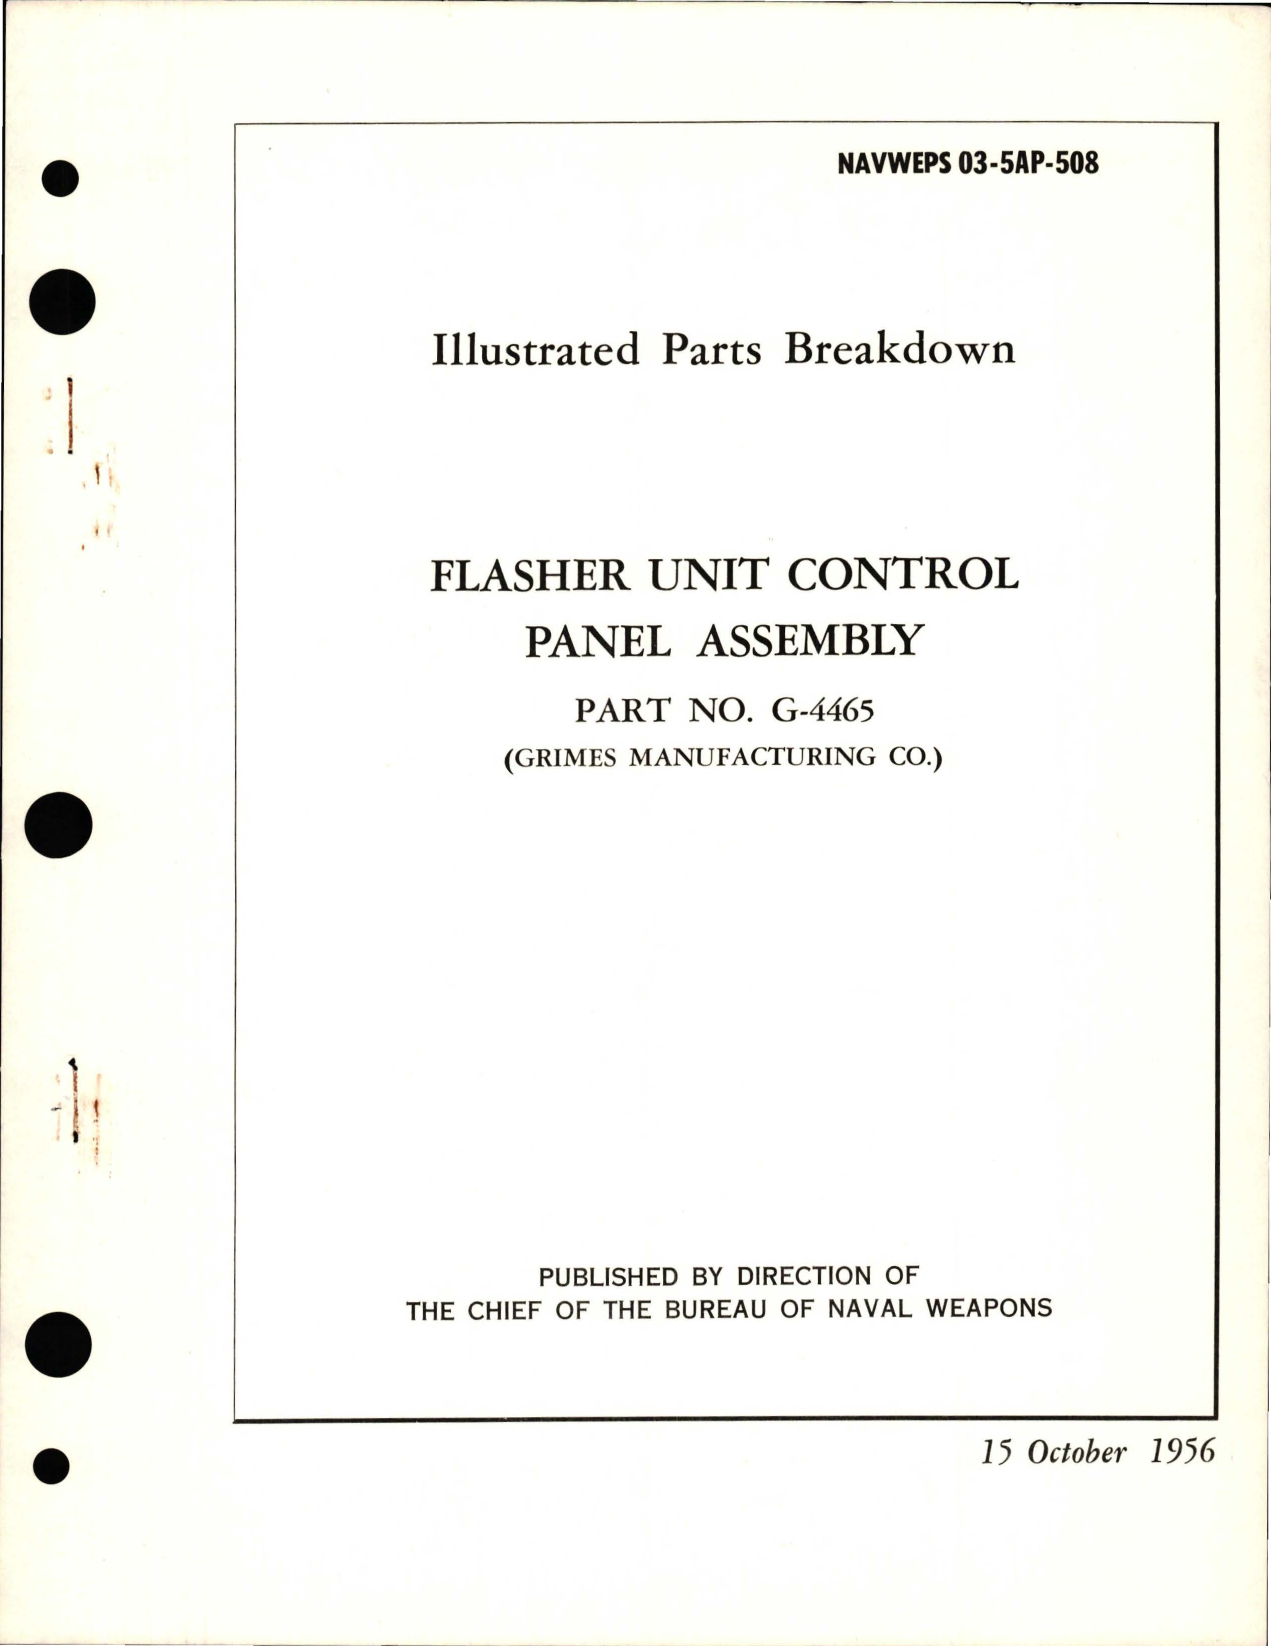 Sample page 1 from AirCorps Library document: Illustrated Parts Breakdown for Flasher Unit Control Panel Assembly - Part G-4465